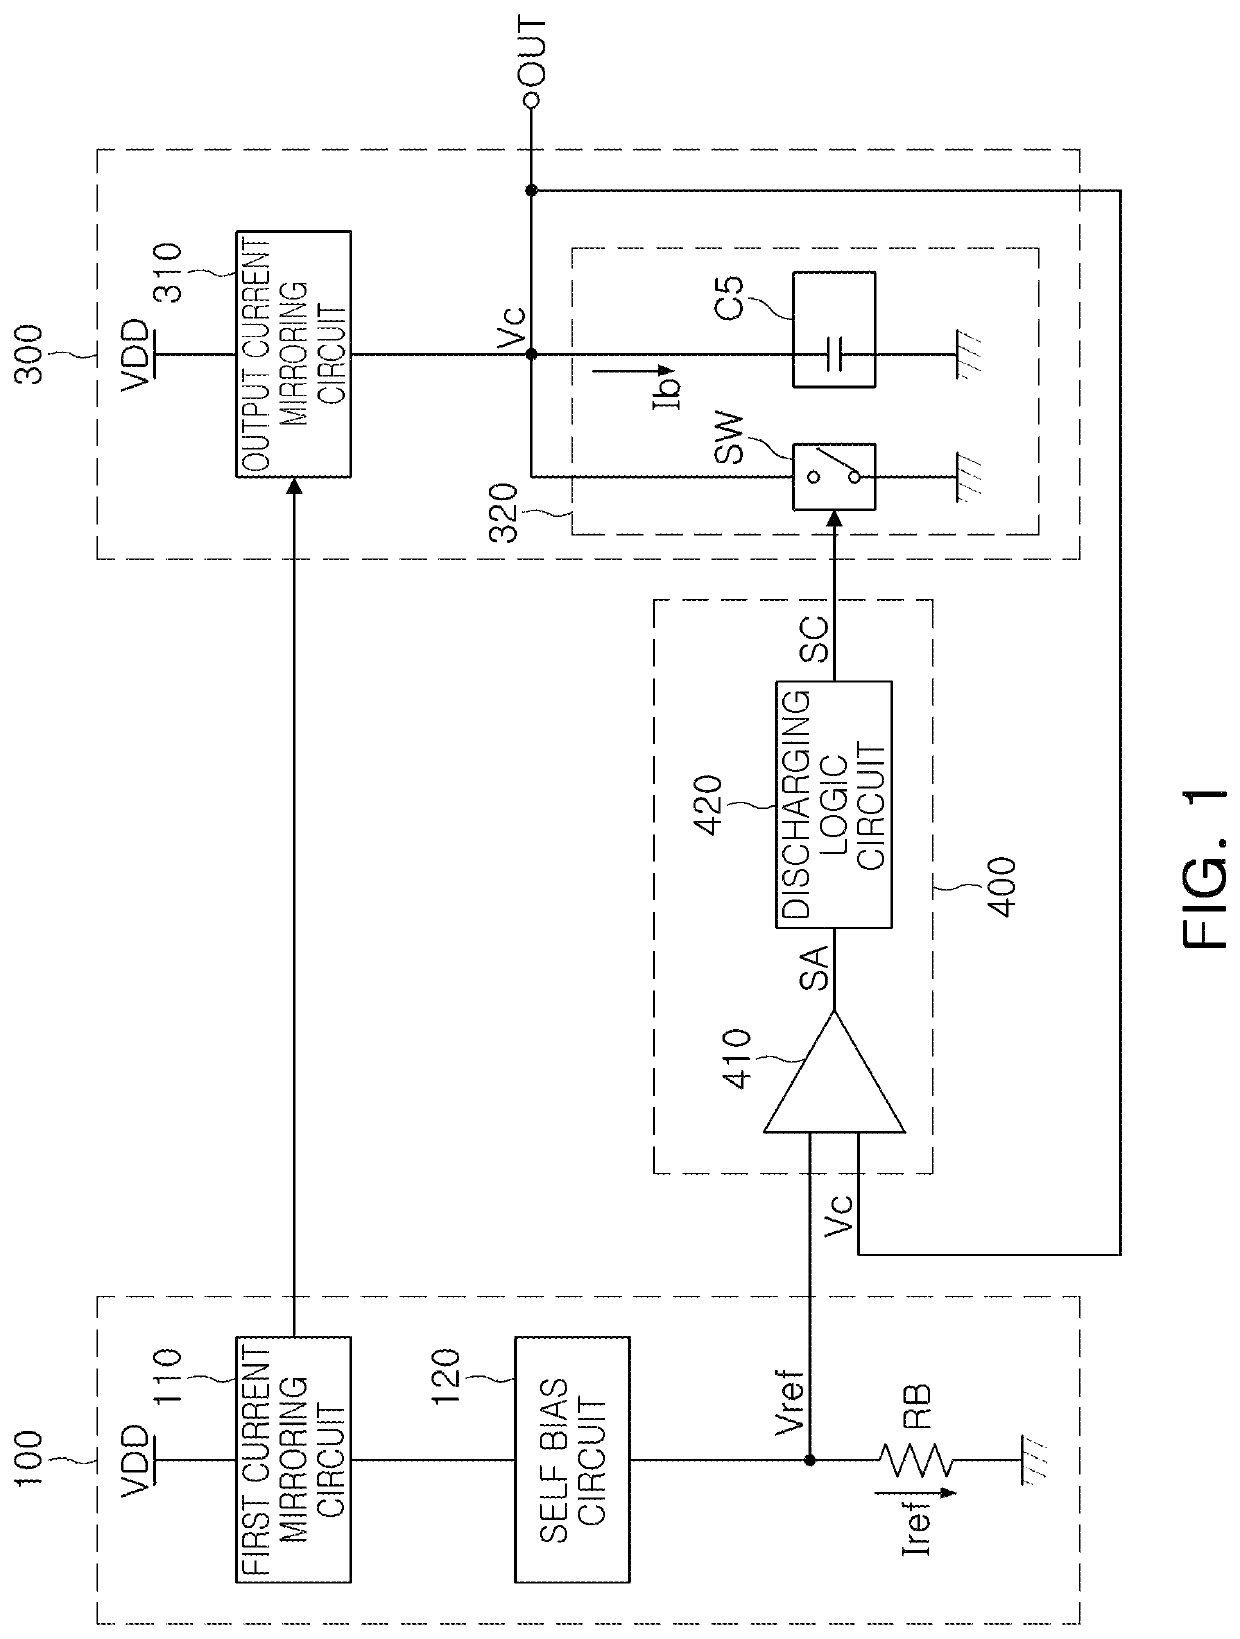 Oscillator circuit resistant to noise and jitter